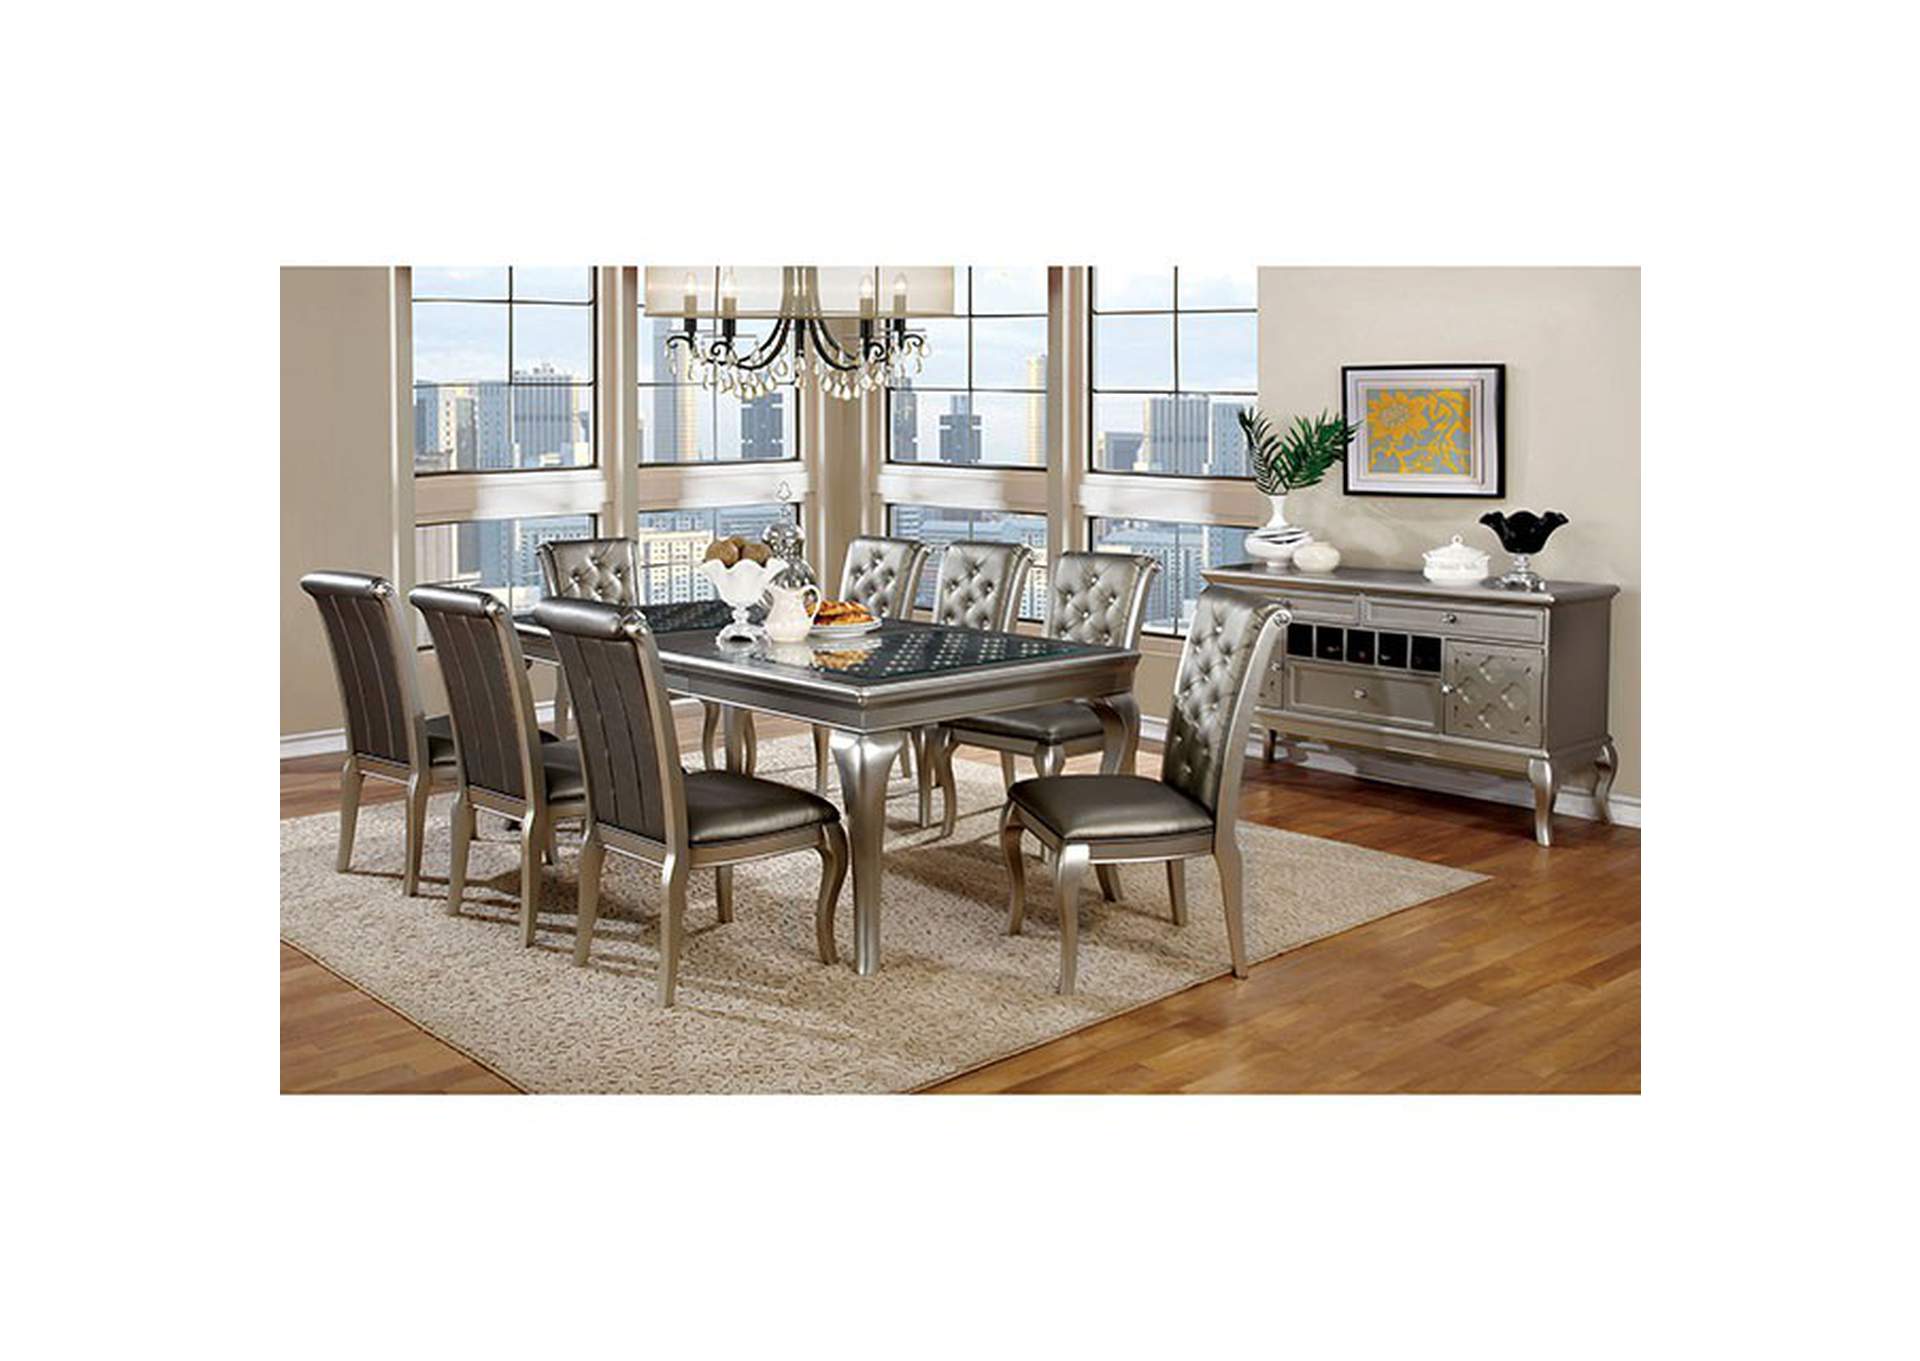 Amina Champagne Dining Table,Furniture of America